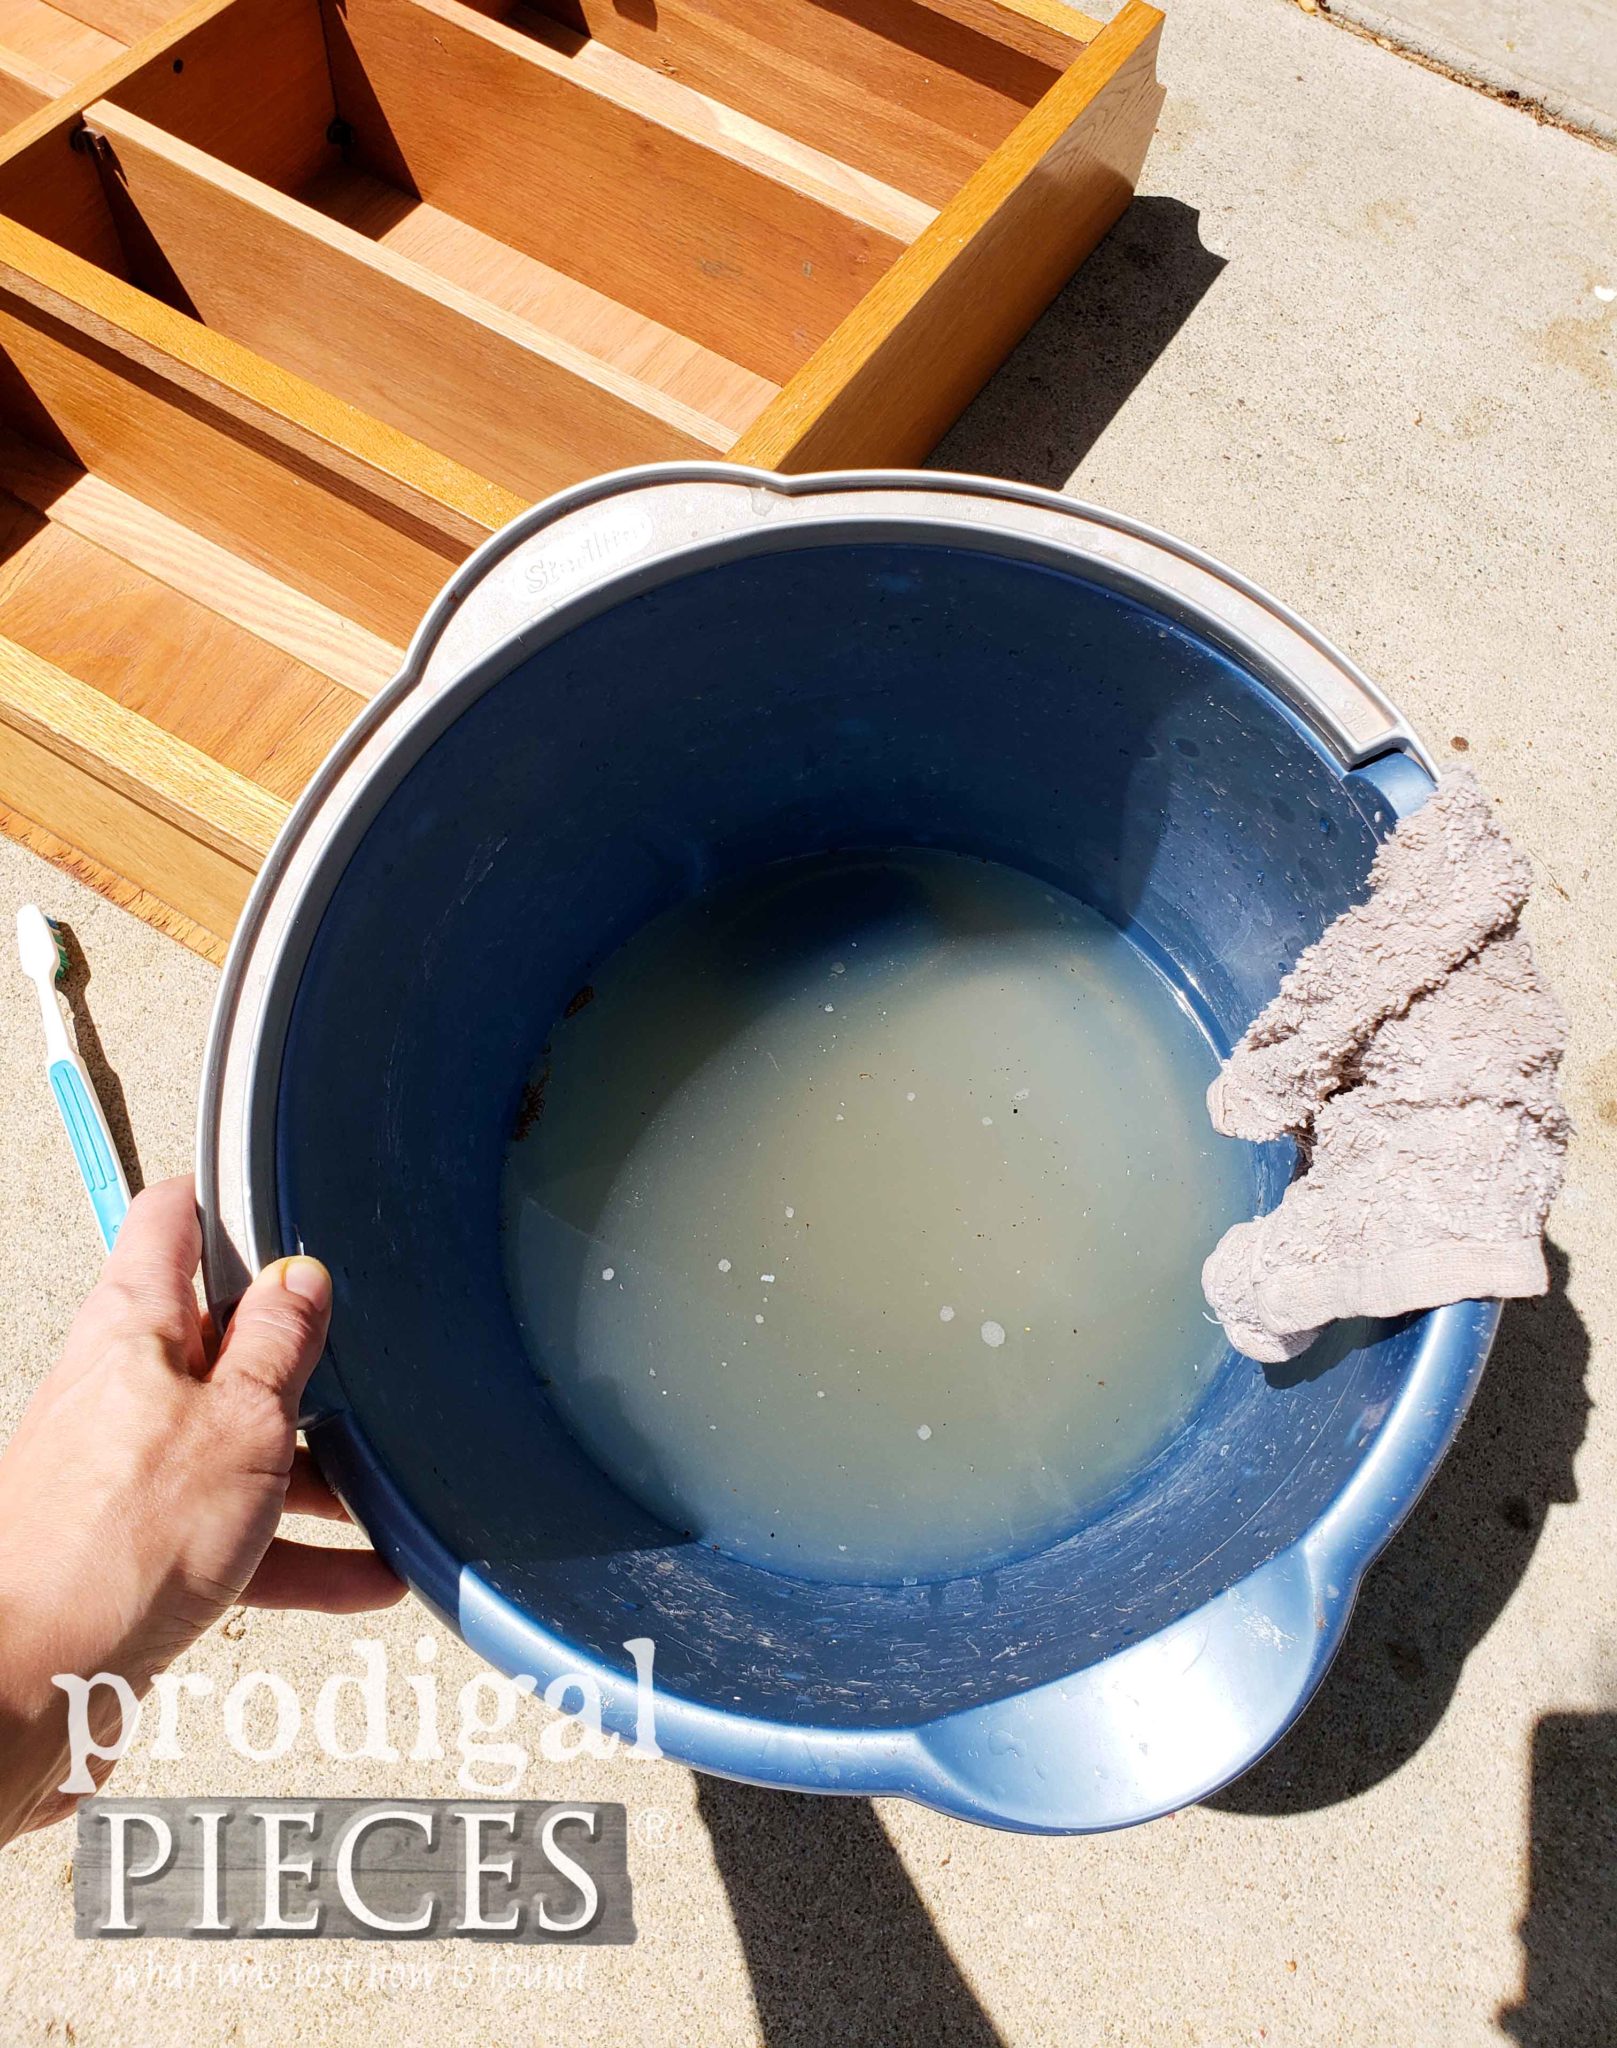 Dirty Water Bucket after Cleaning | prodigalpieces.com